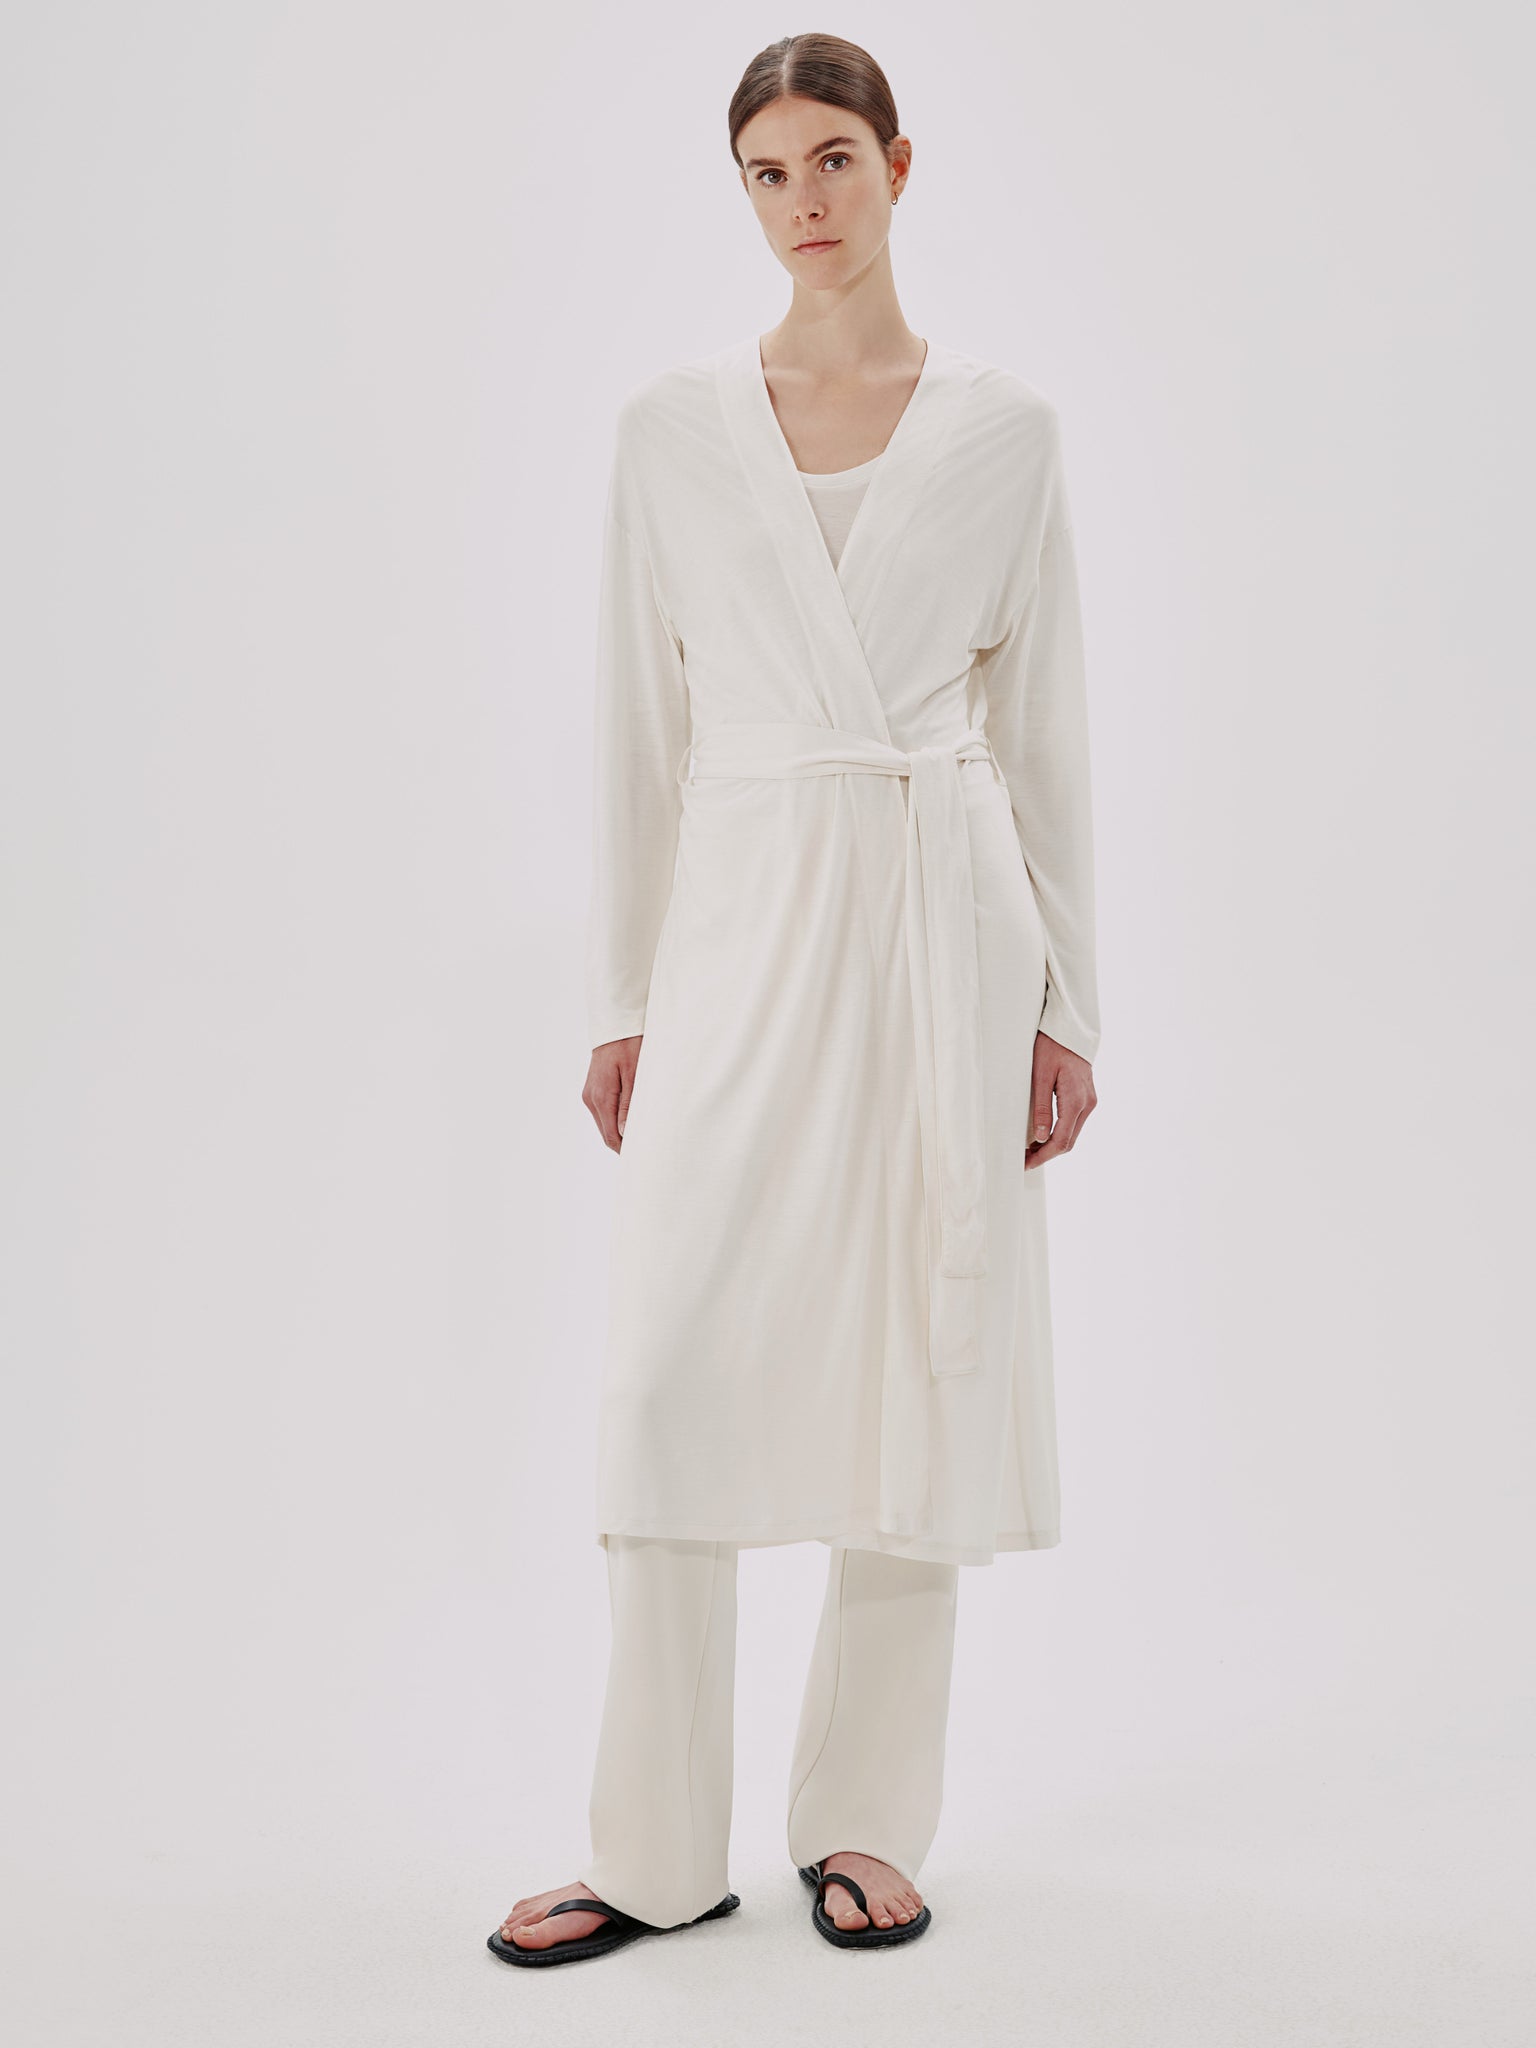 Another Tomorrow Elongated Robe In Neutral